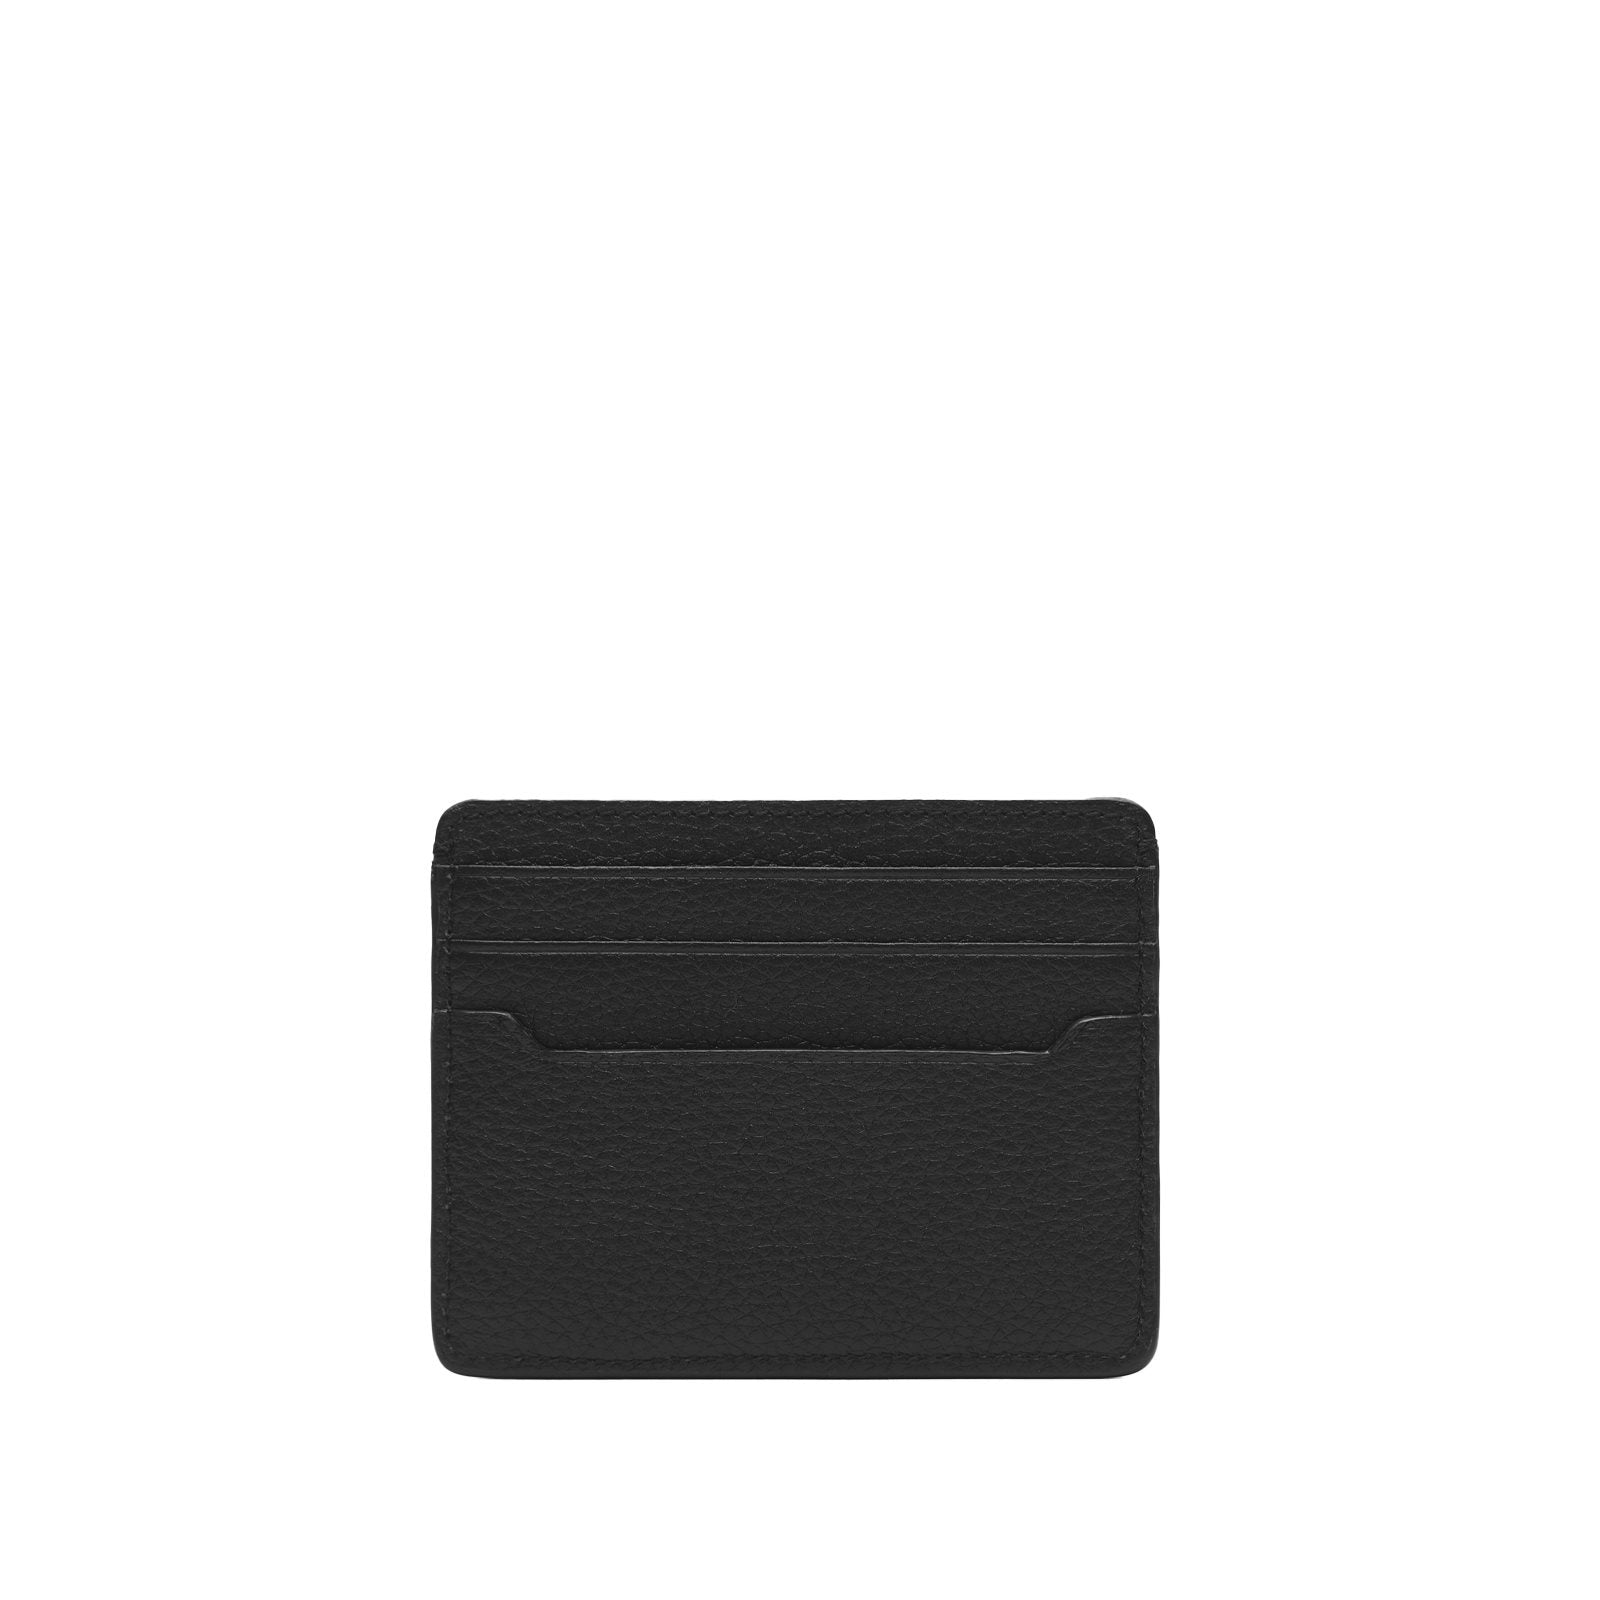 Grained leather card holder